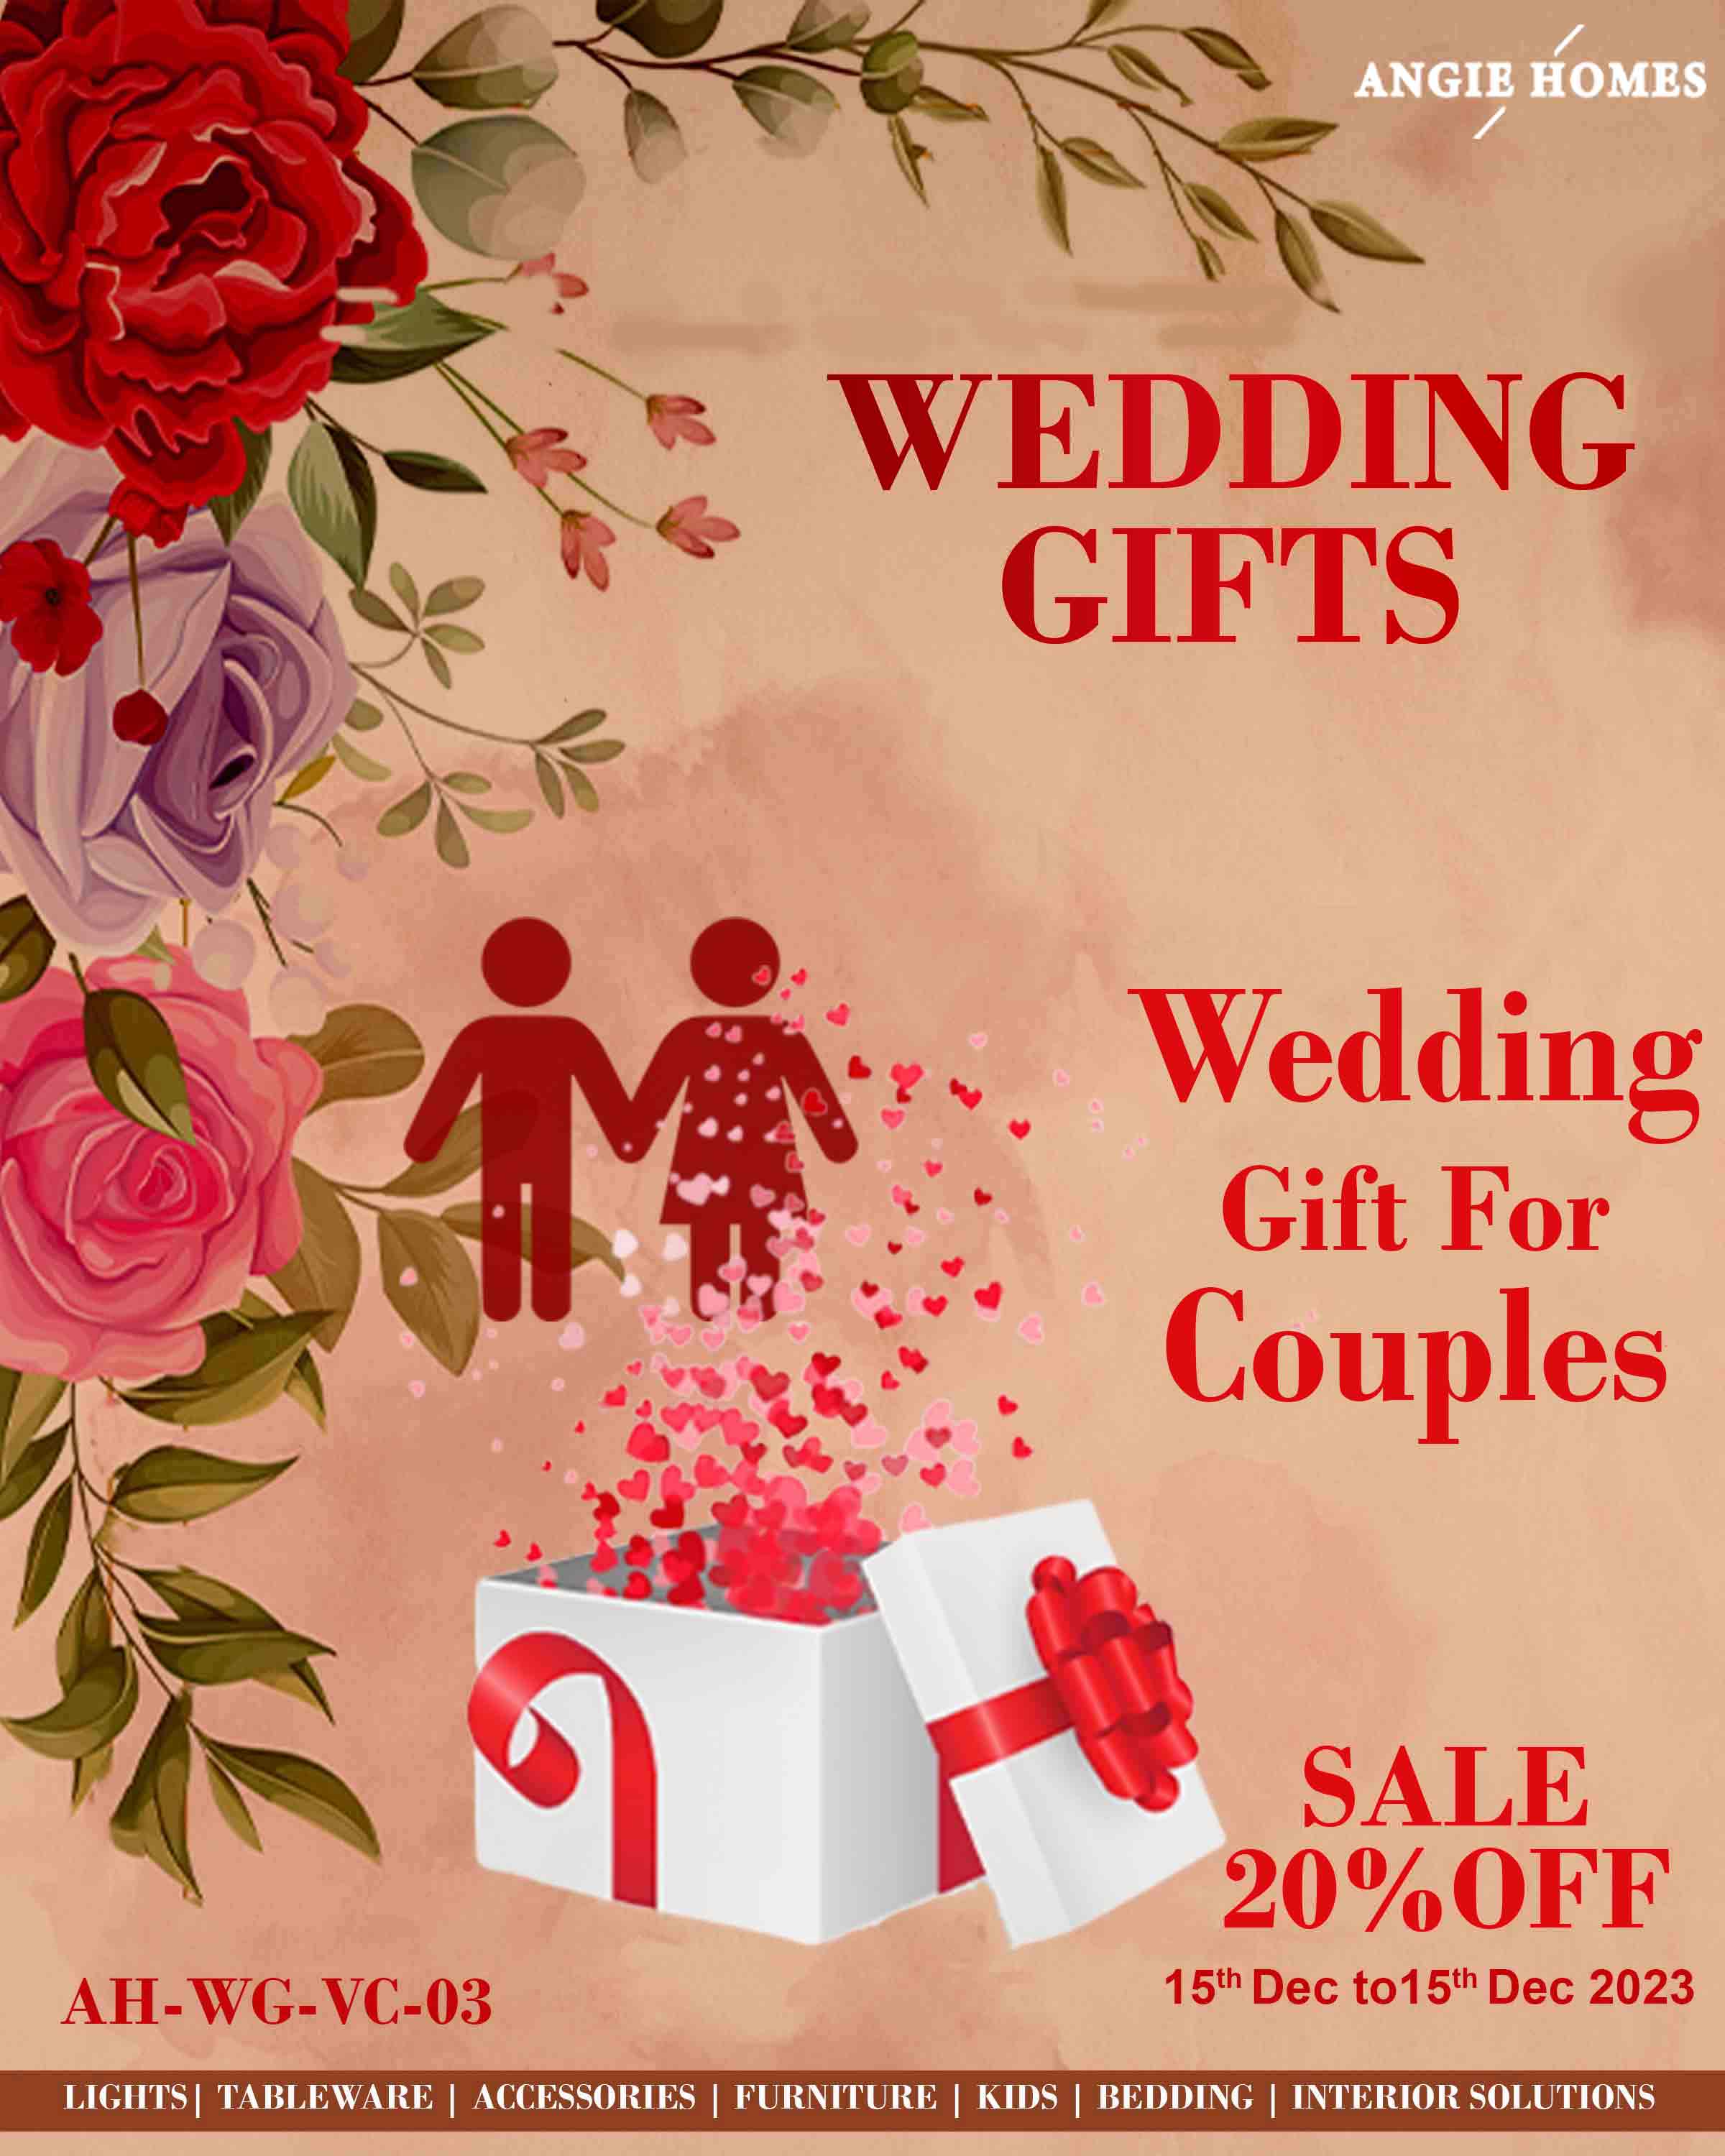 NEWLY COUPLES WEDDING GIFTS | MARRIAGE GIFT VOUCHER | GIFTTING CARD COUPLES ANGIE HOMES